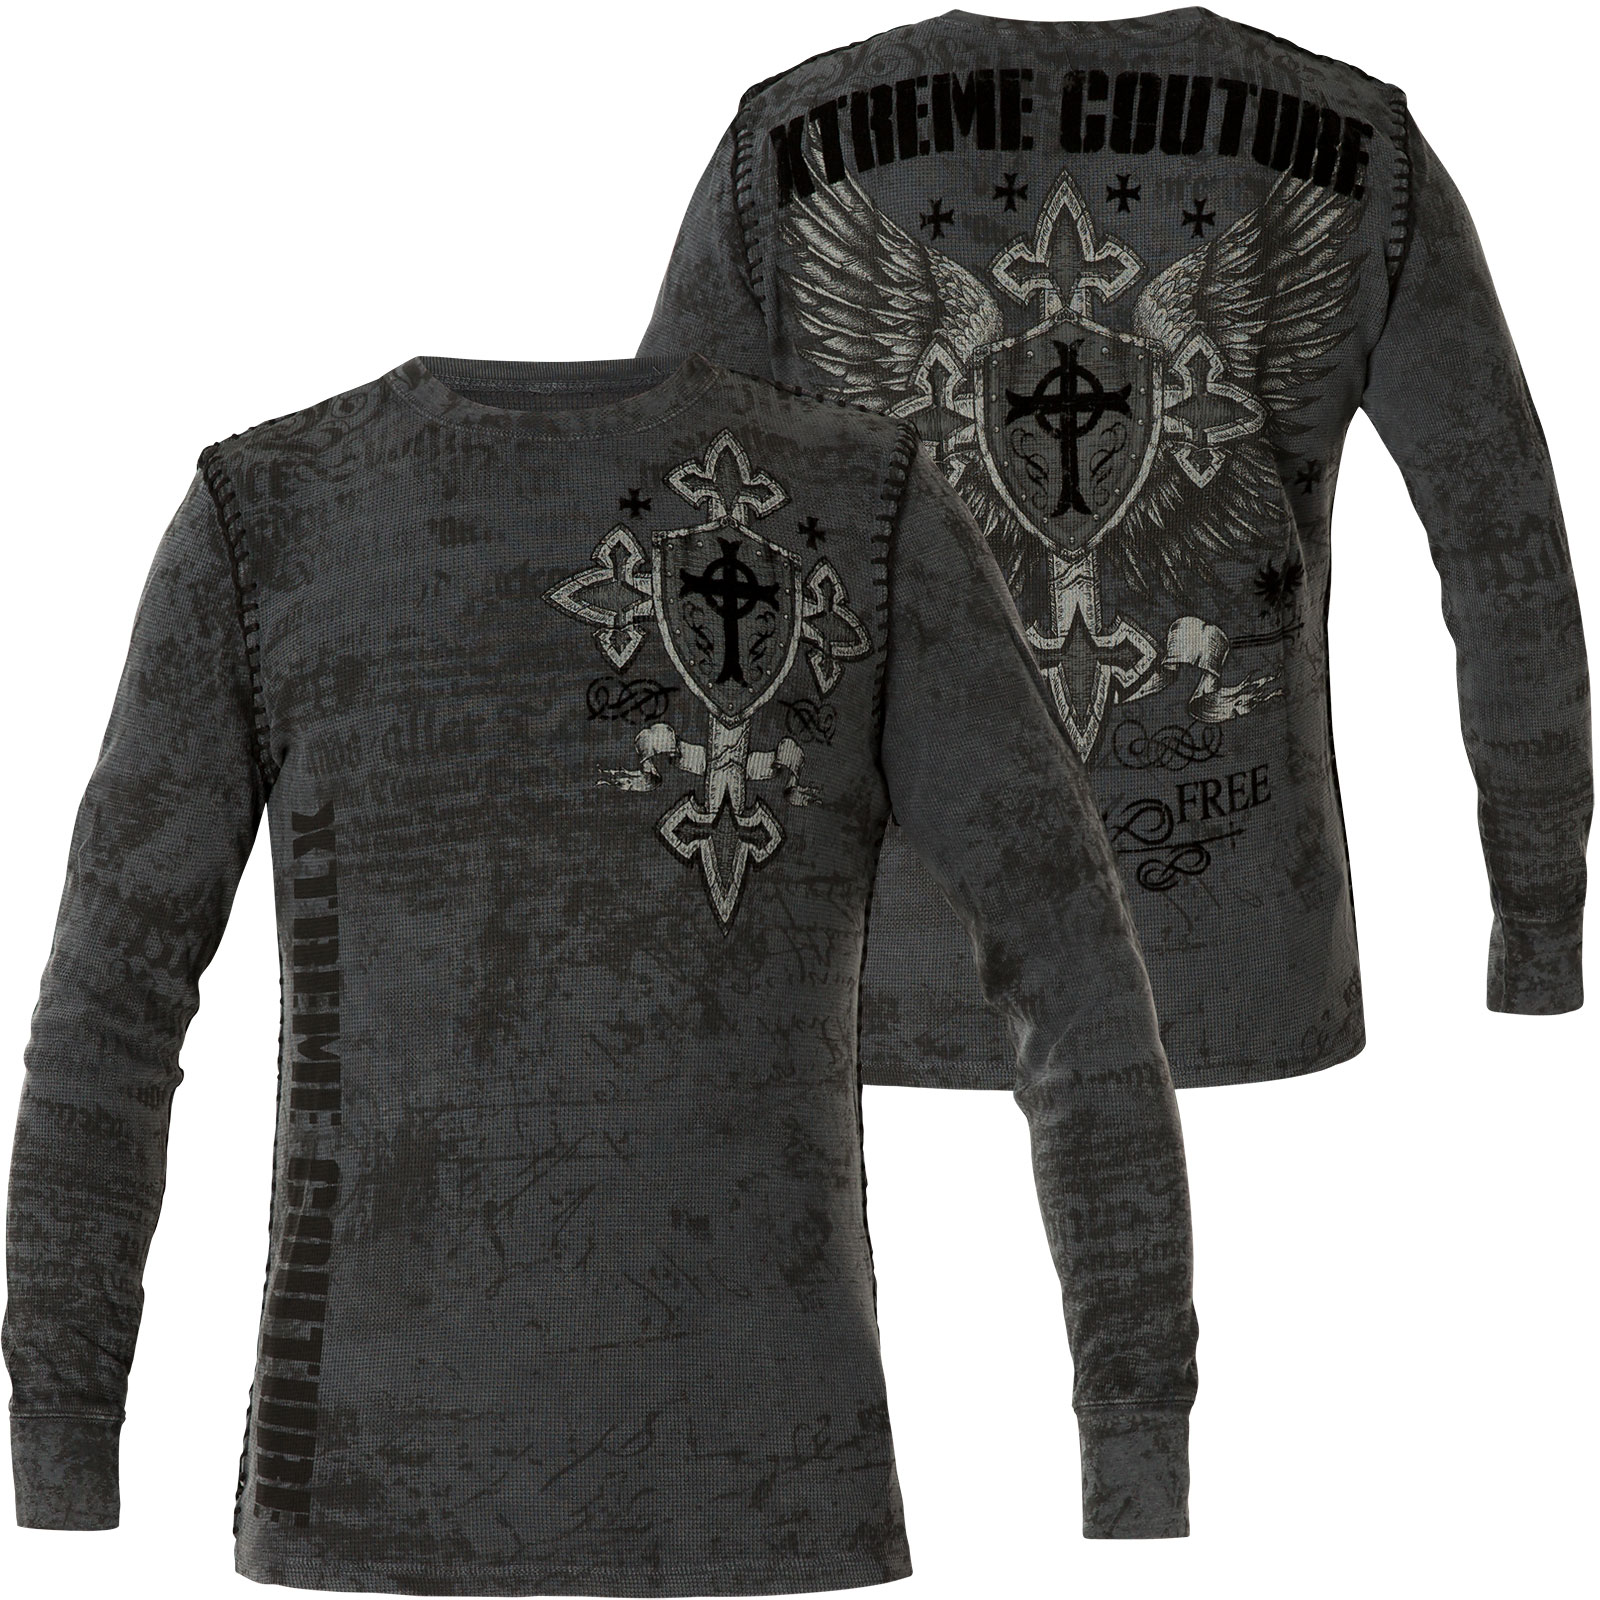 Xtreme Couture by Affliction Thermal Pro Faith Print with large cross